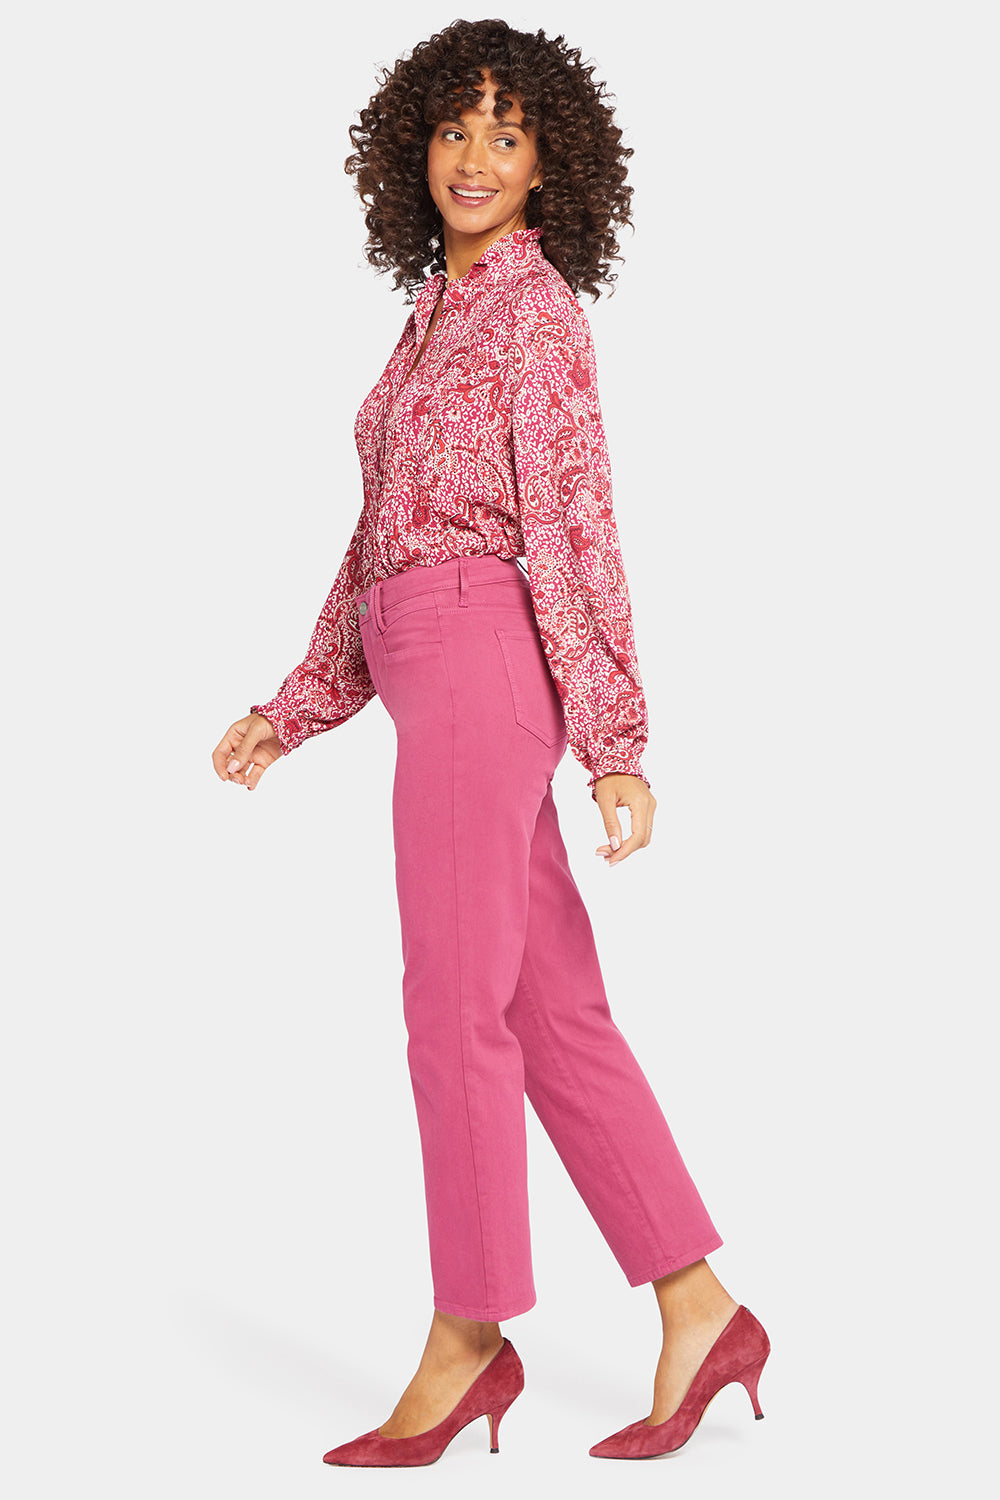 NYDJ Bailey Relaxed Straight Ankle Jeans With High Rise And Square Pockets - Turning Pink